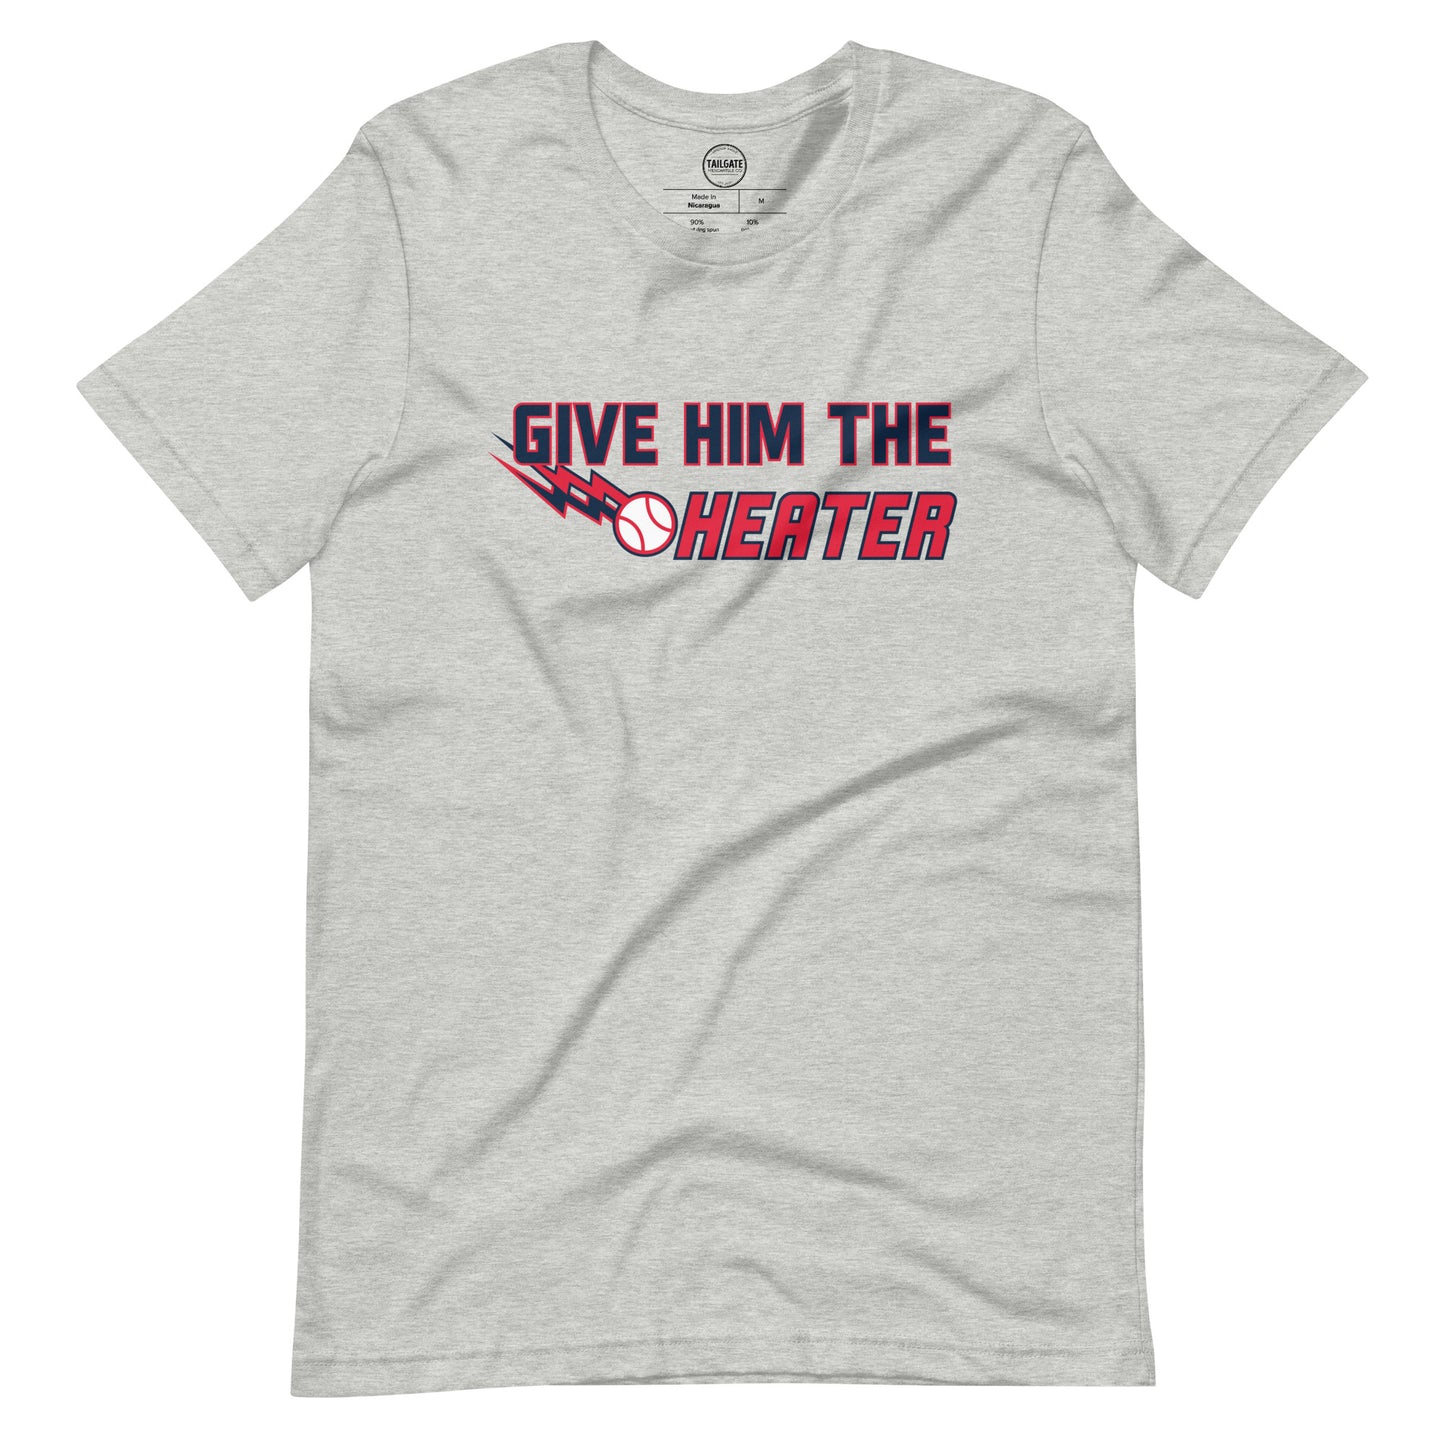 Image of heather athletic grey t-shirt with design of "Give Him The Heater" in navy/red/white located on centre chest. Throw Him The Heater is an homage to the great baseball movie "Major League". This design is exclusive to Tailgate Mercantile and available only online.